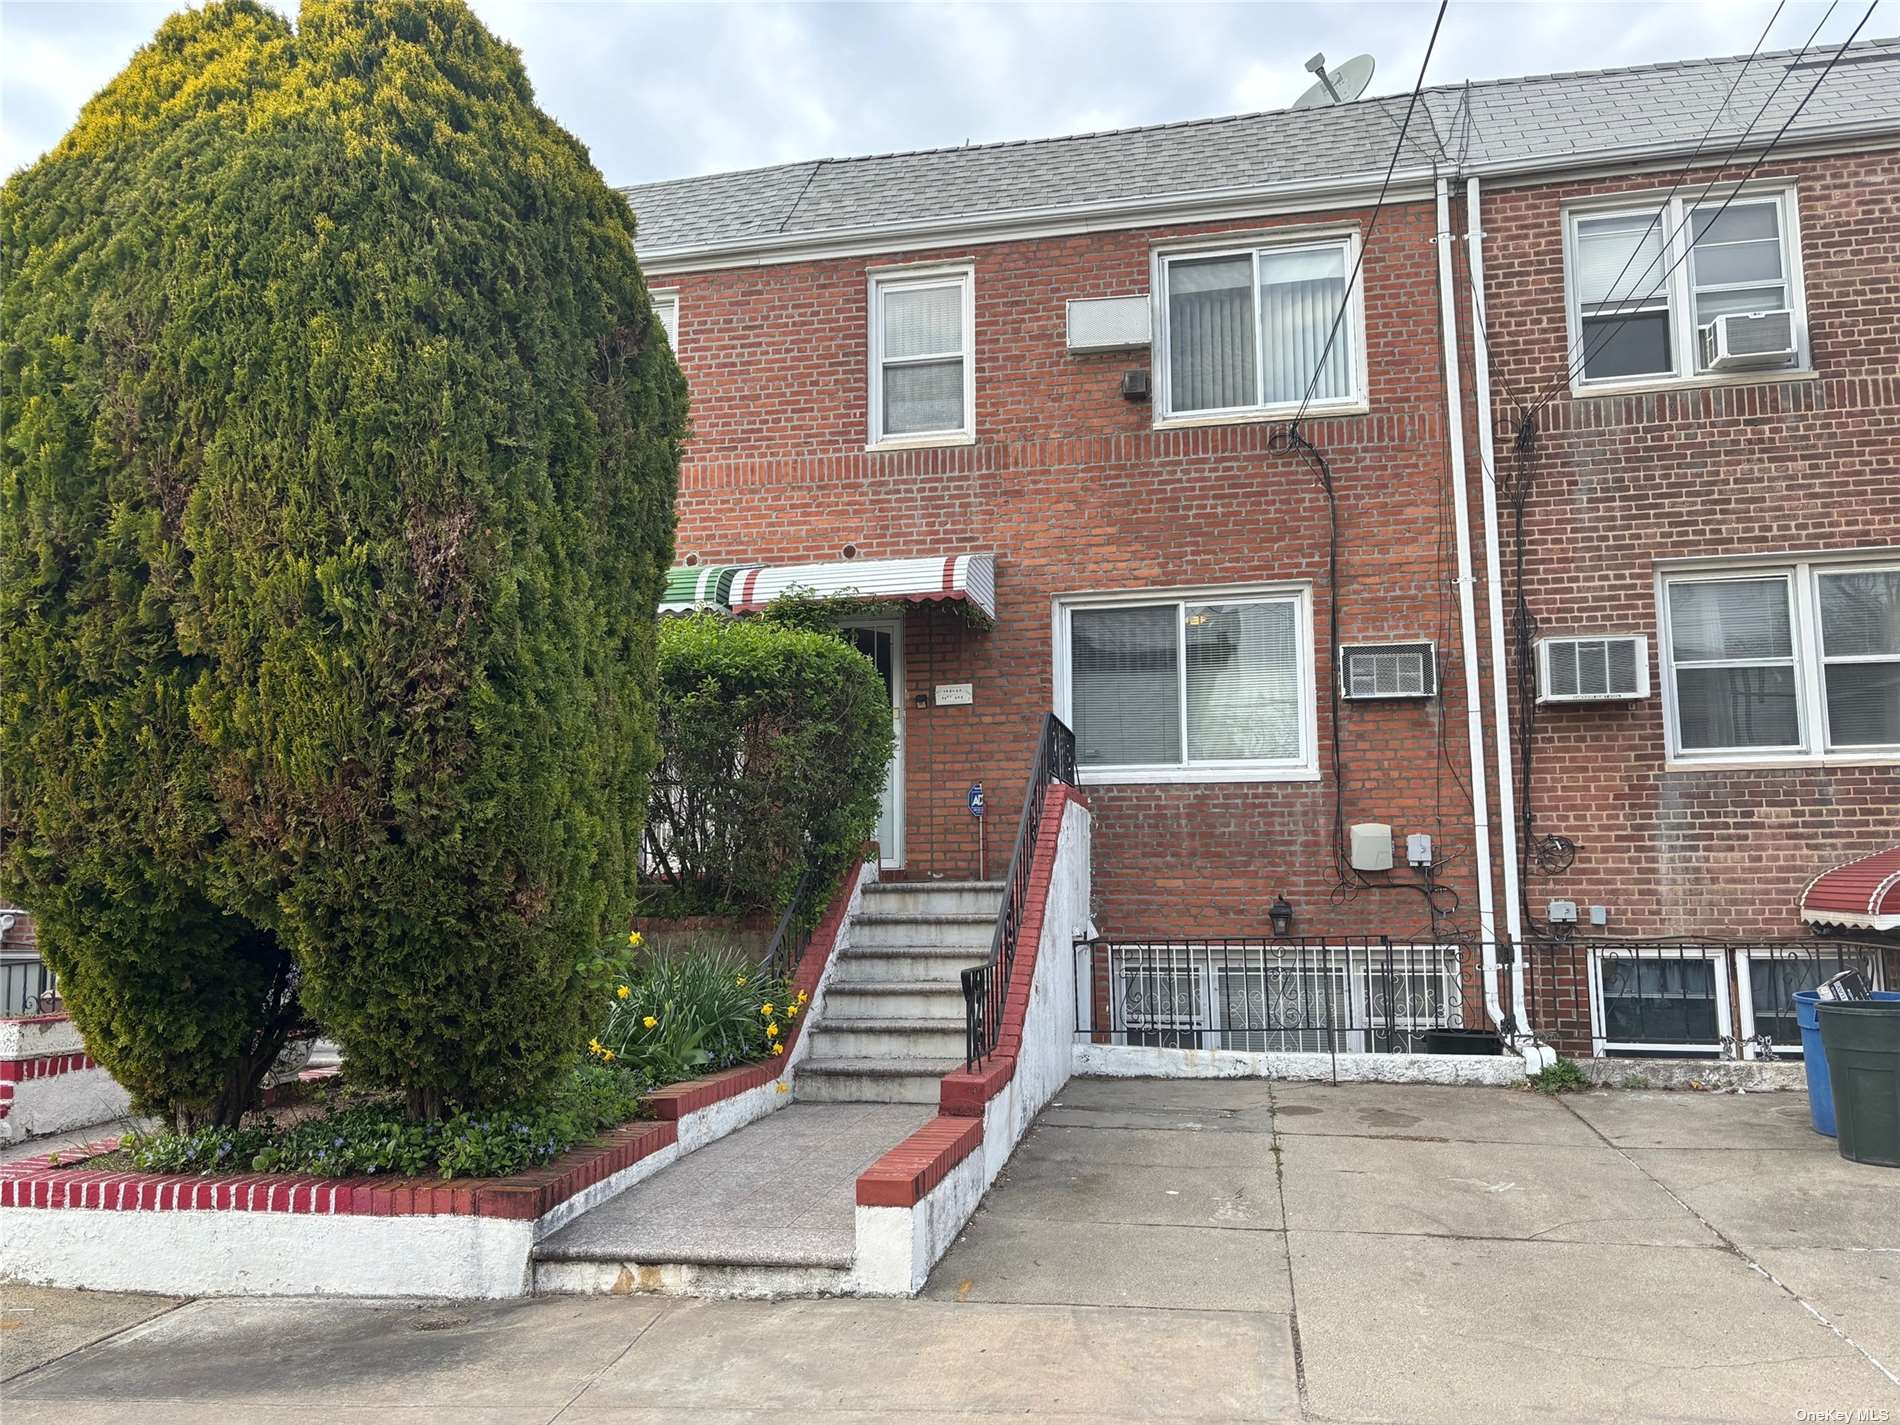 View Fresh Meadows, NY 11365 townhome